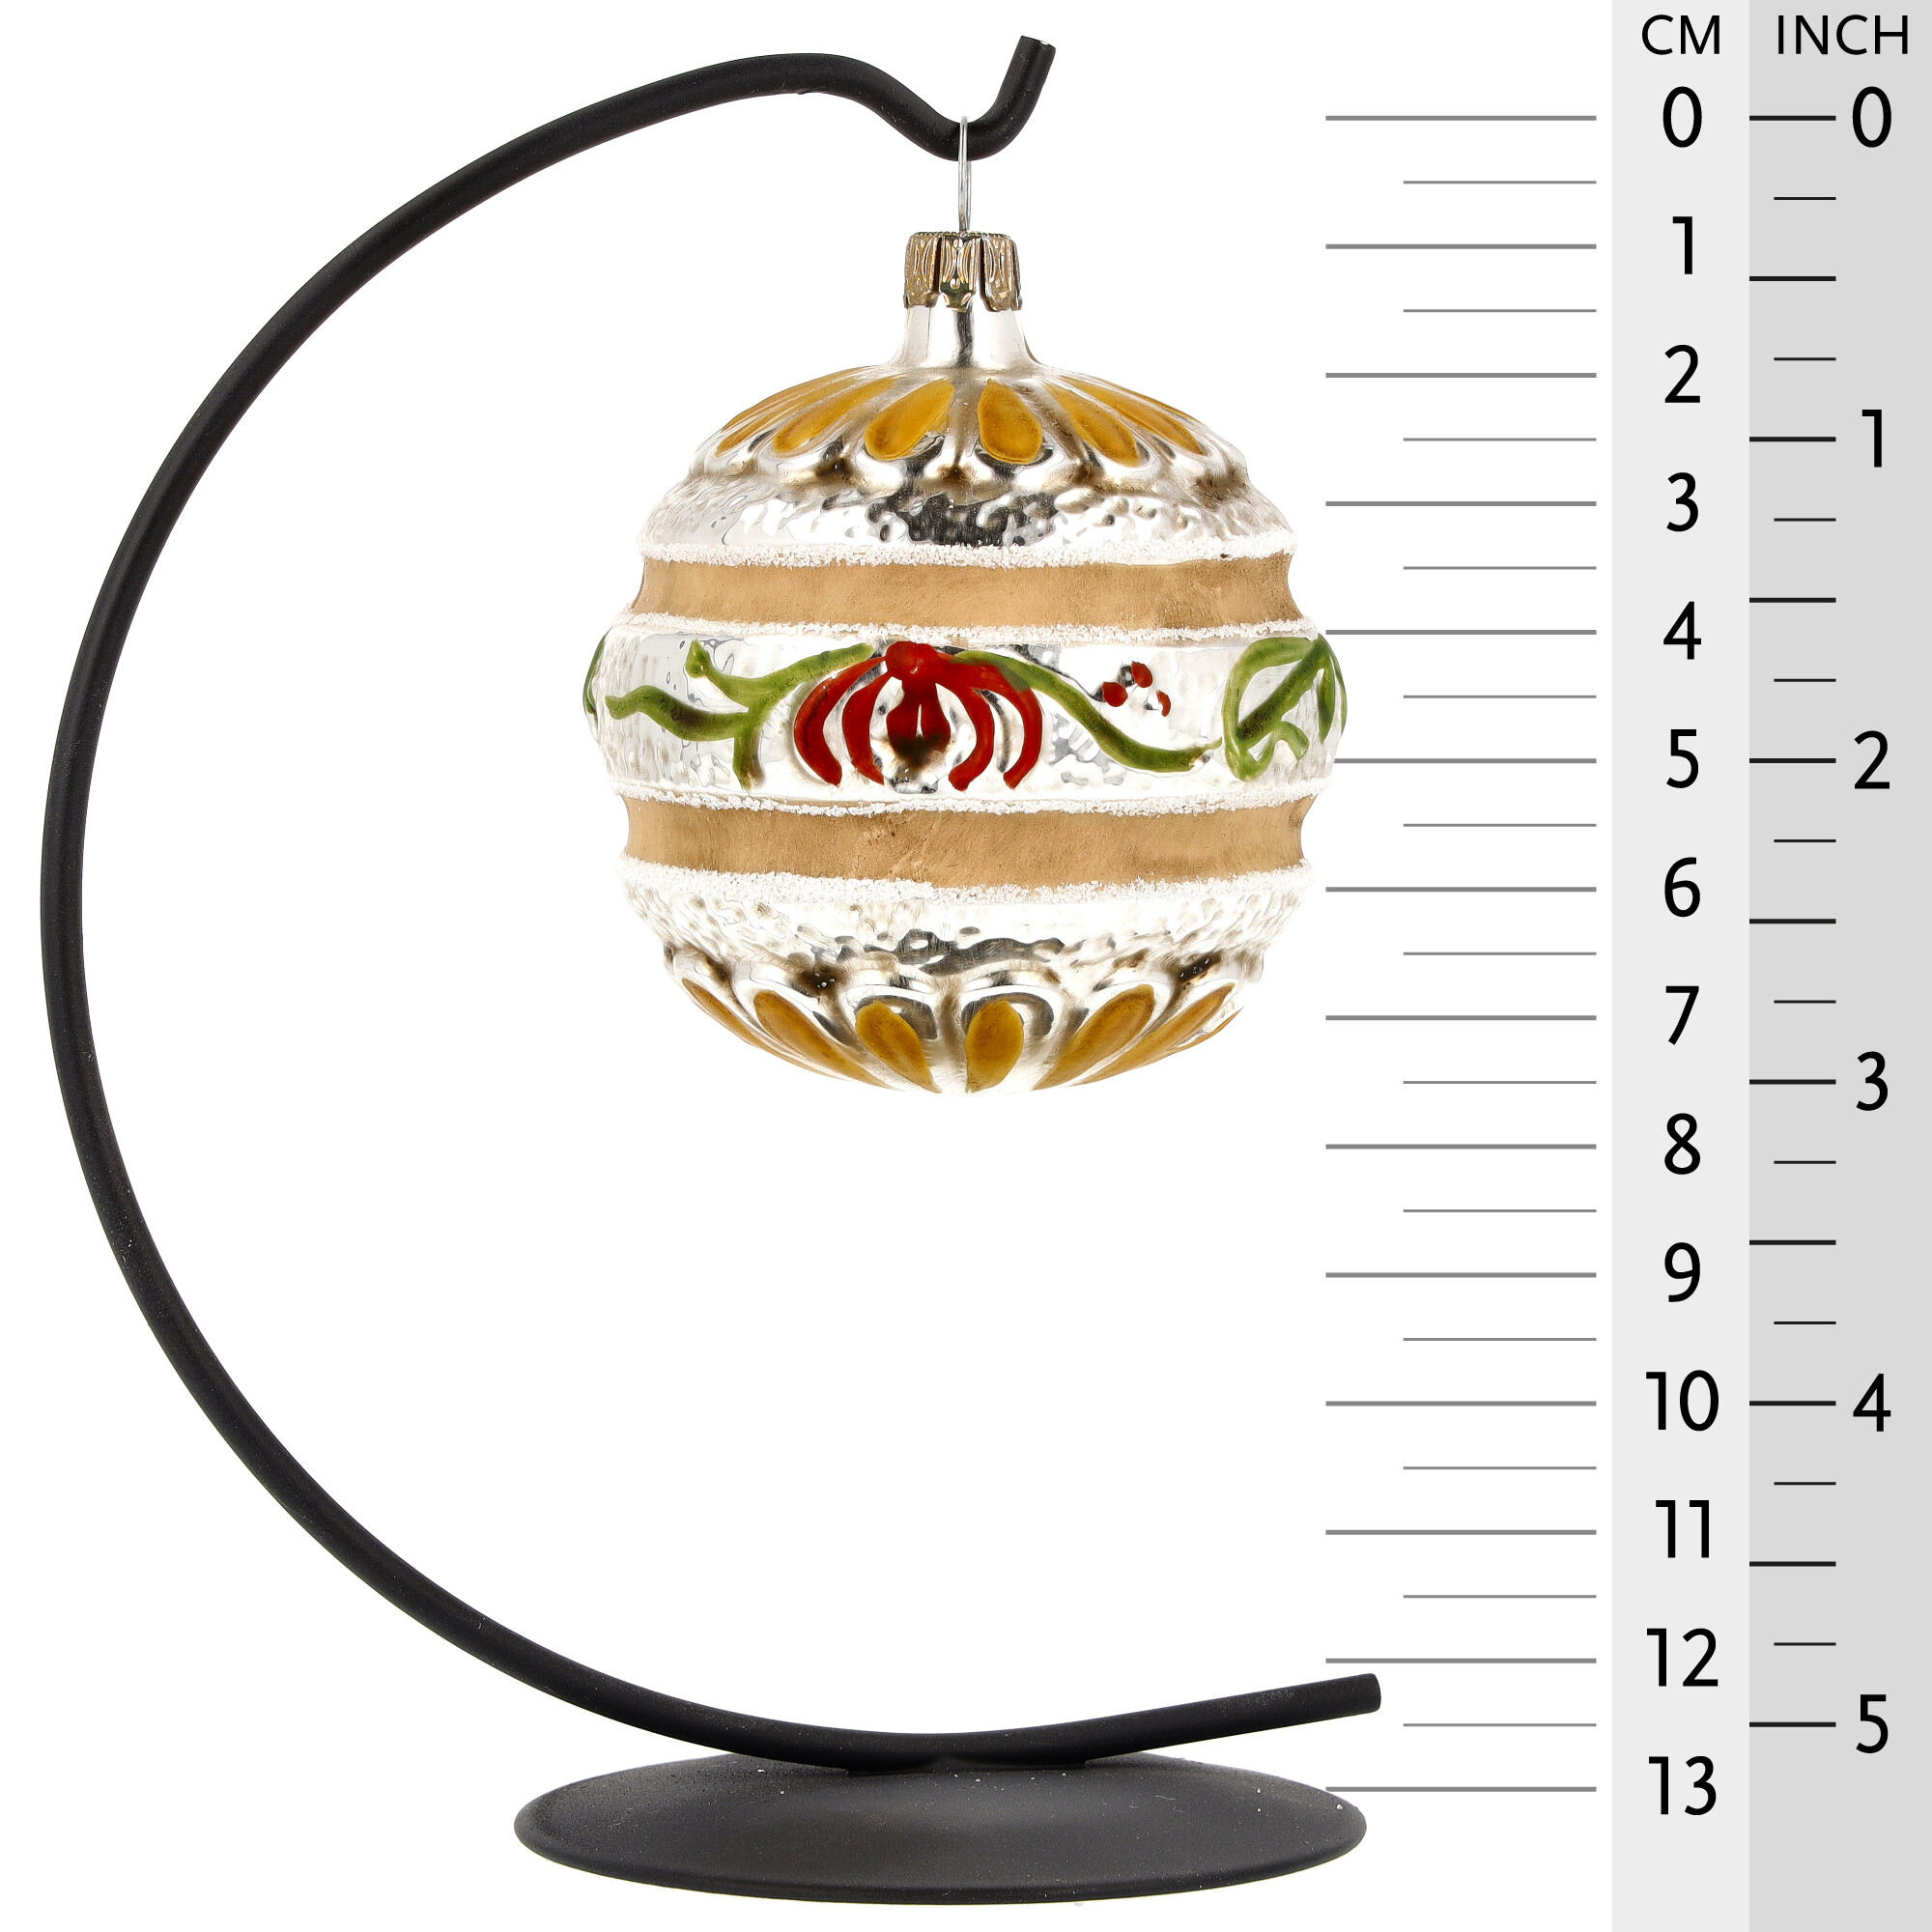 Retro Vintage style Christmas Glass Ornament - Ball with blossom band